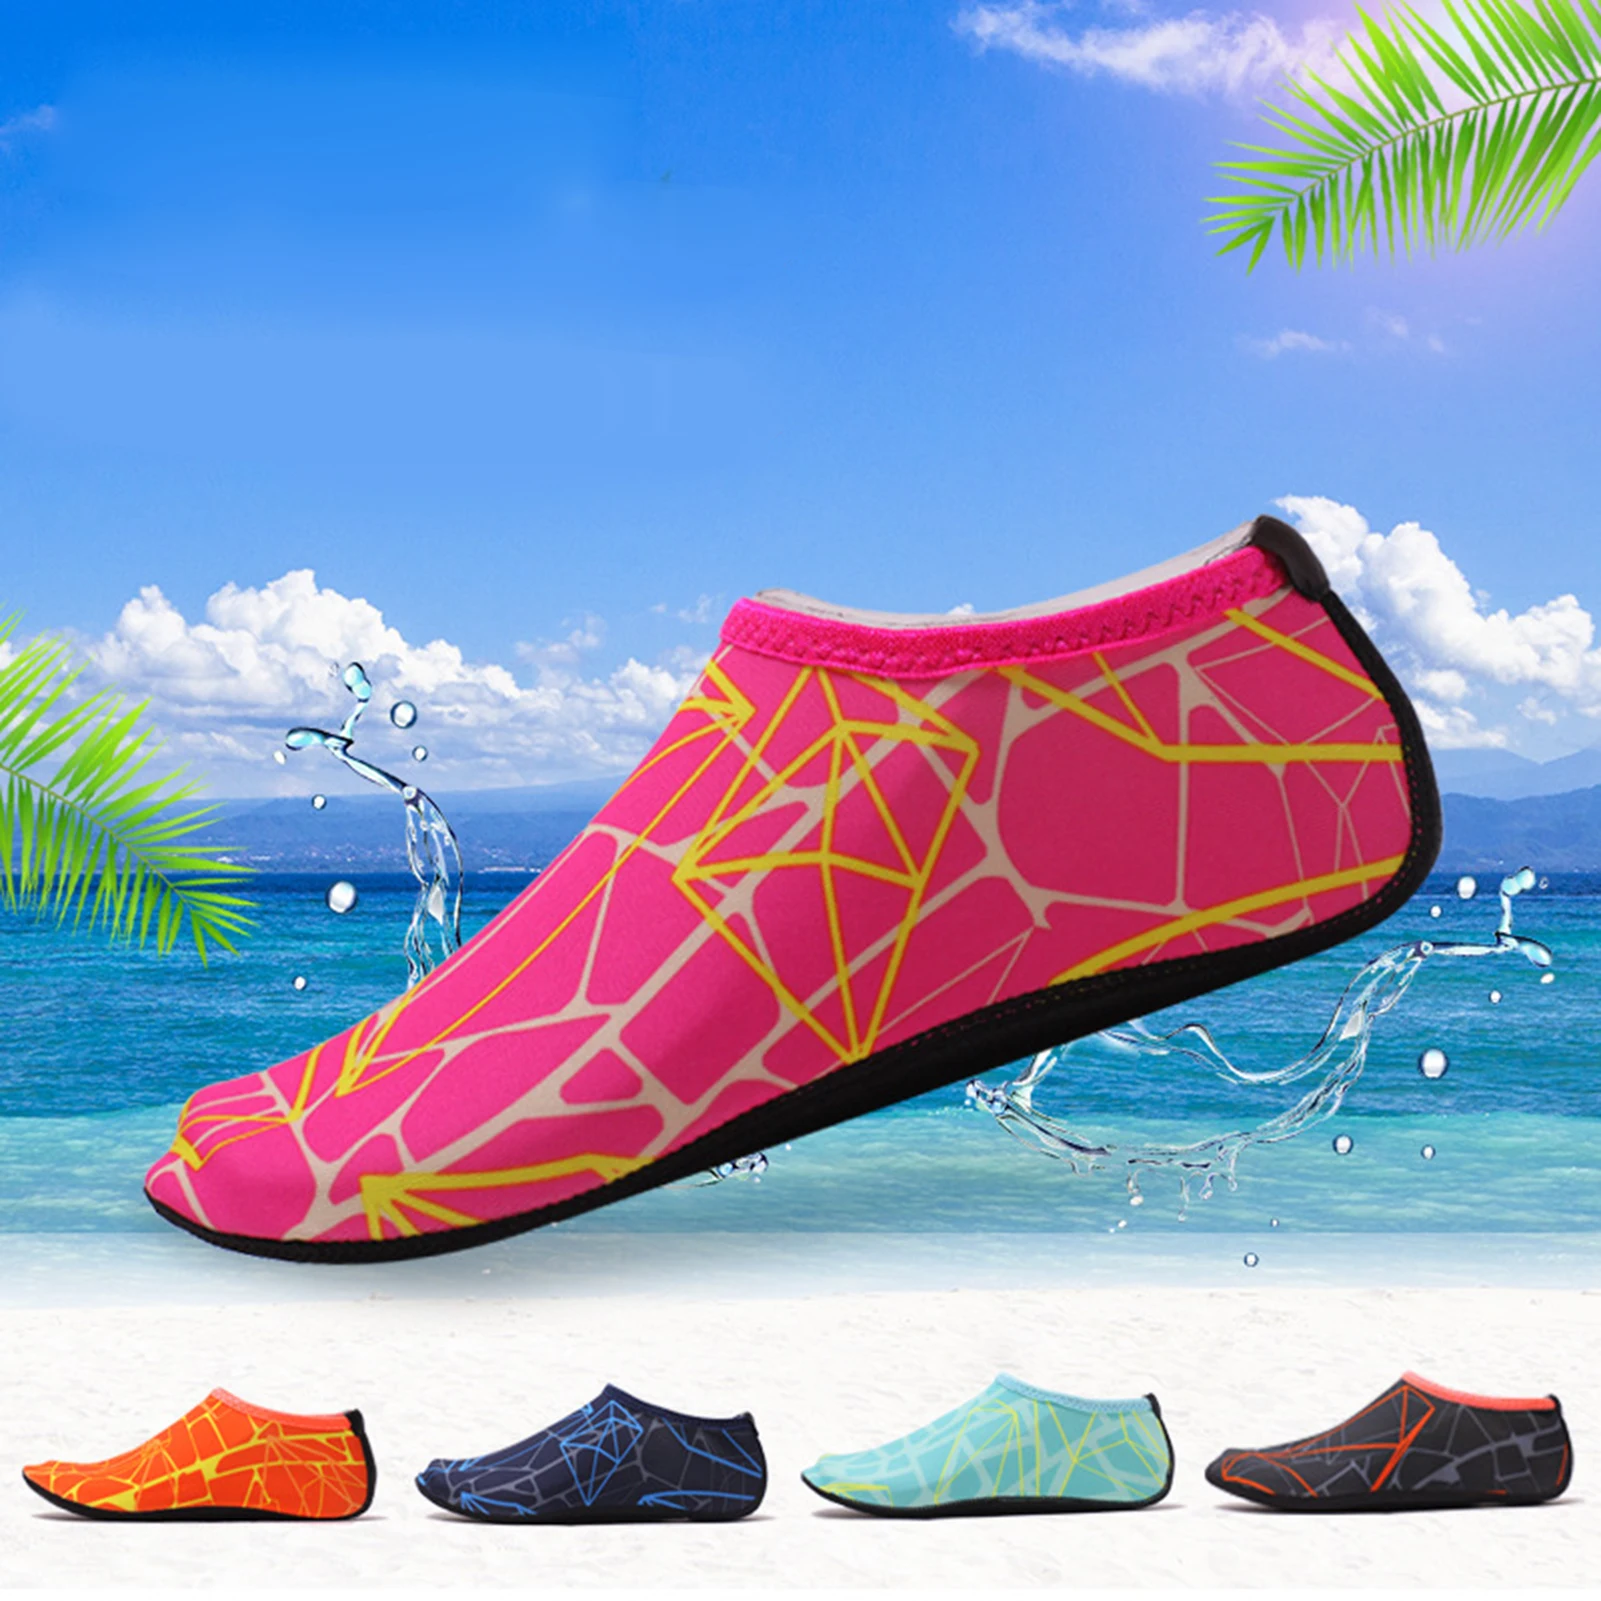 

New Aqua Socks Barefoot Dive Socks Shoes for Outdoor Beach Swimming Surfing Snorkeling Scuba Diving diving fins Neoprene booties